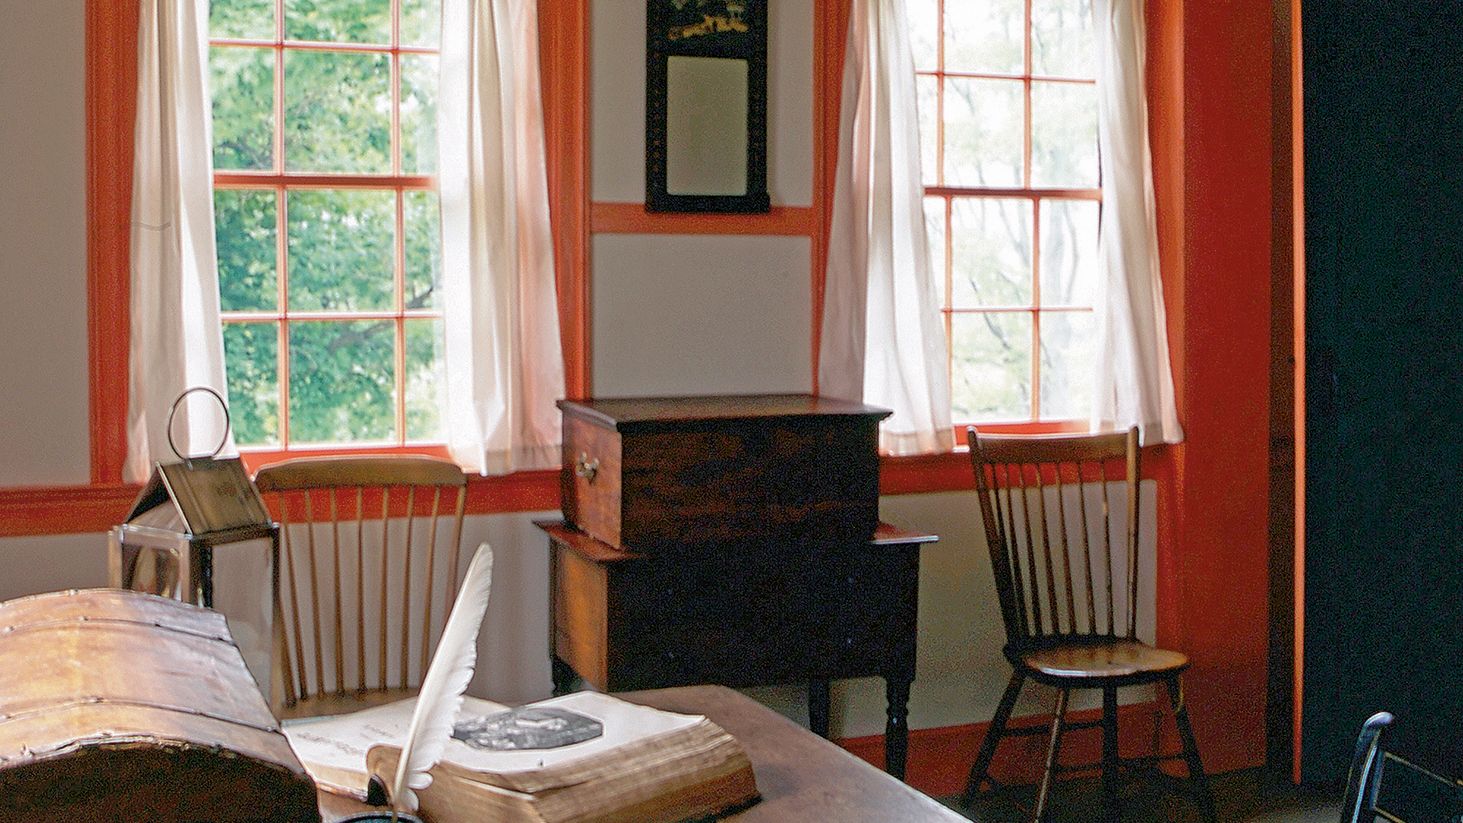 Interior of the John Johnson home in Hiram, Ohio.  Books, papers and a trunk on a table.